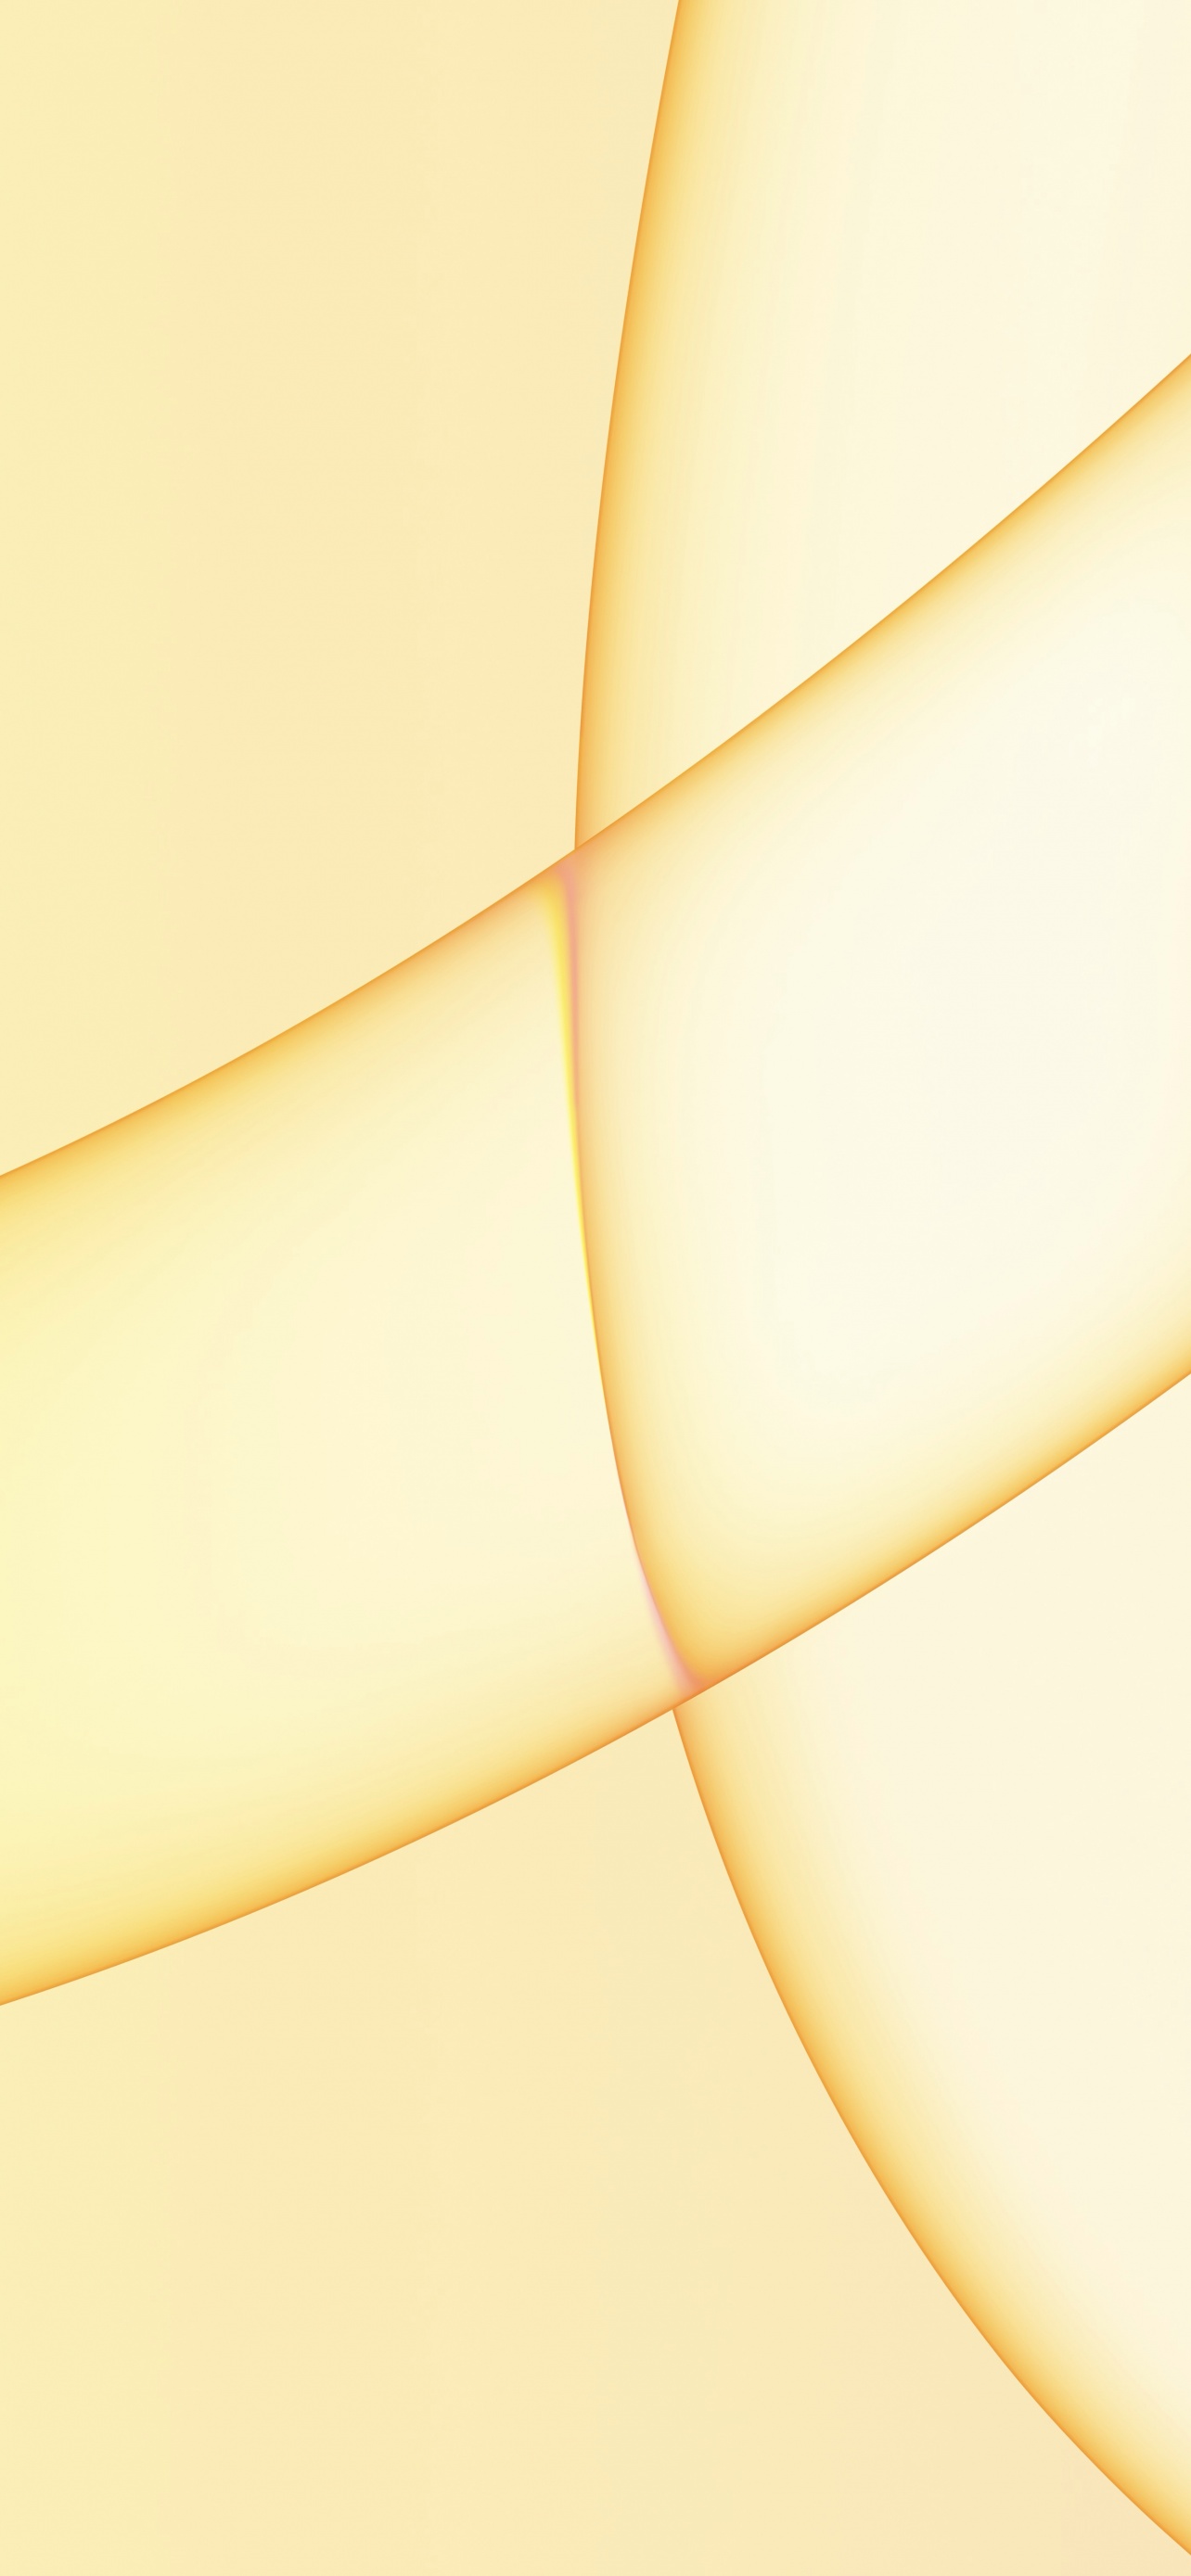 iMac 2021 Wallpaper 4K, Apple Event Stock, Yellow background, 5K, Abstract